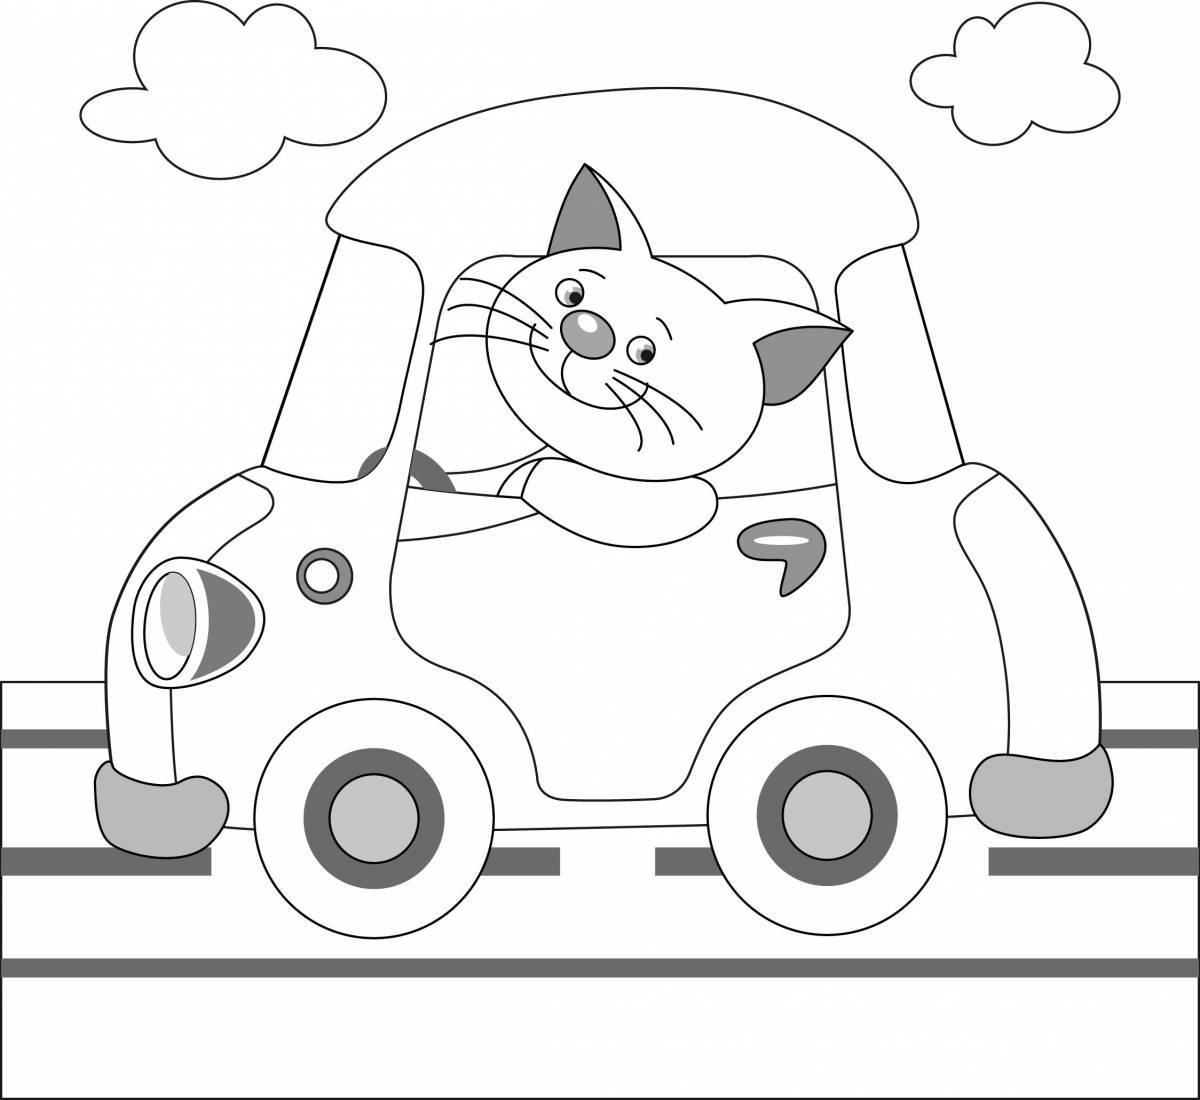 Innovative car coloring book for kids